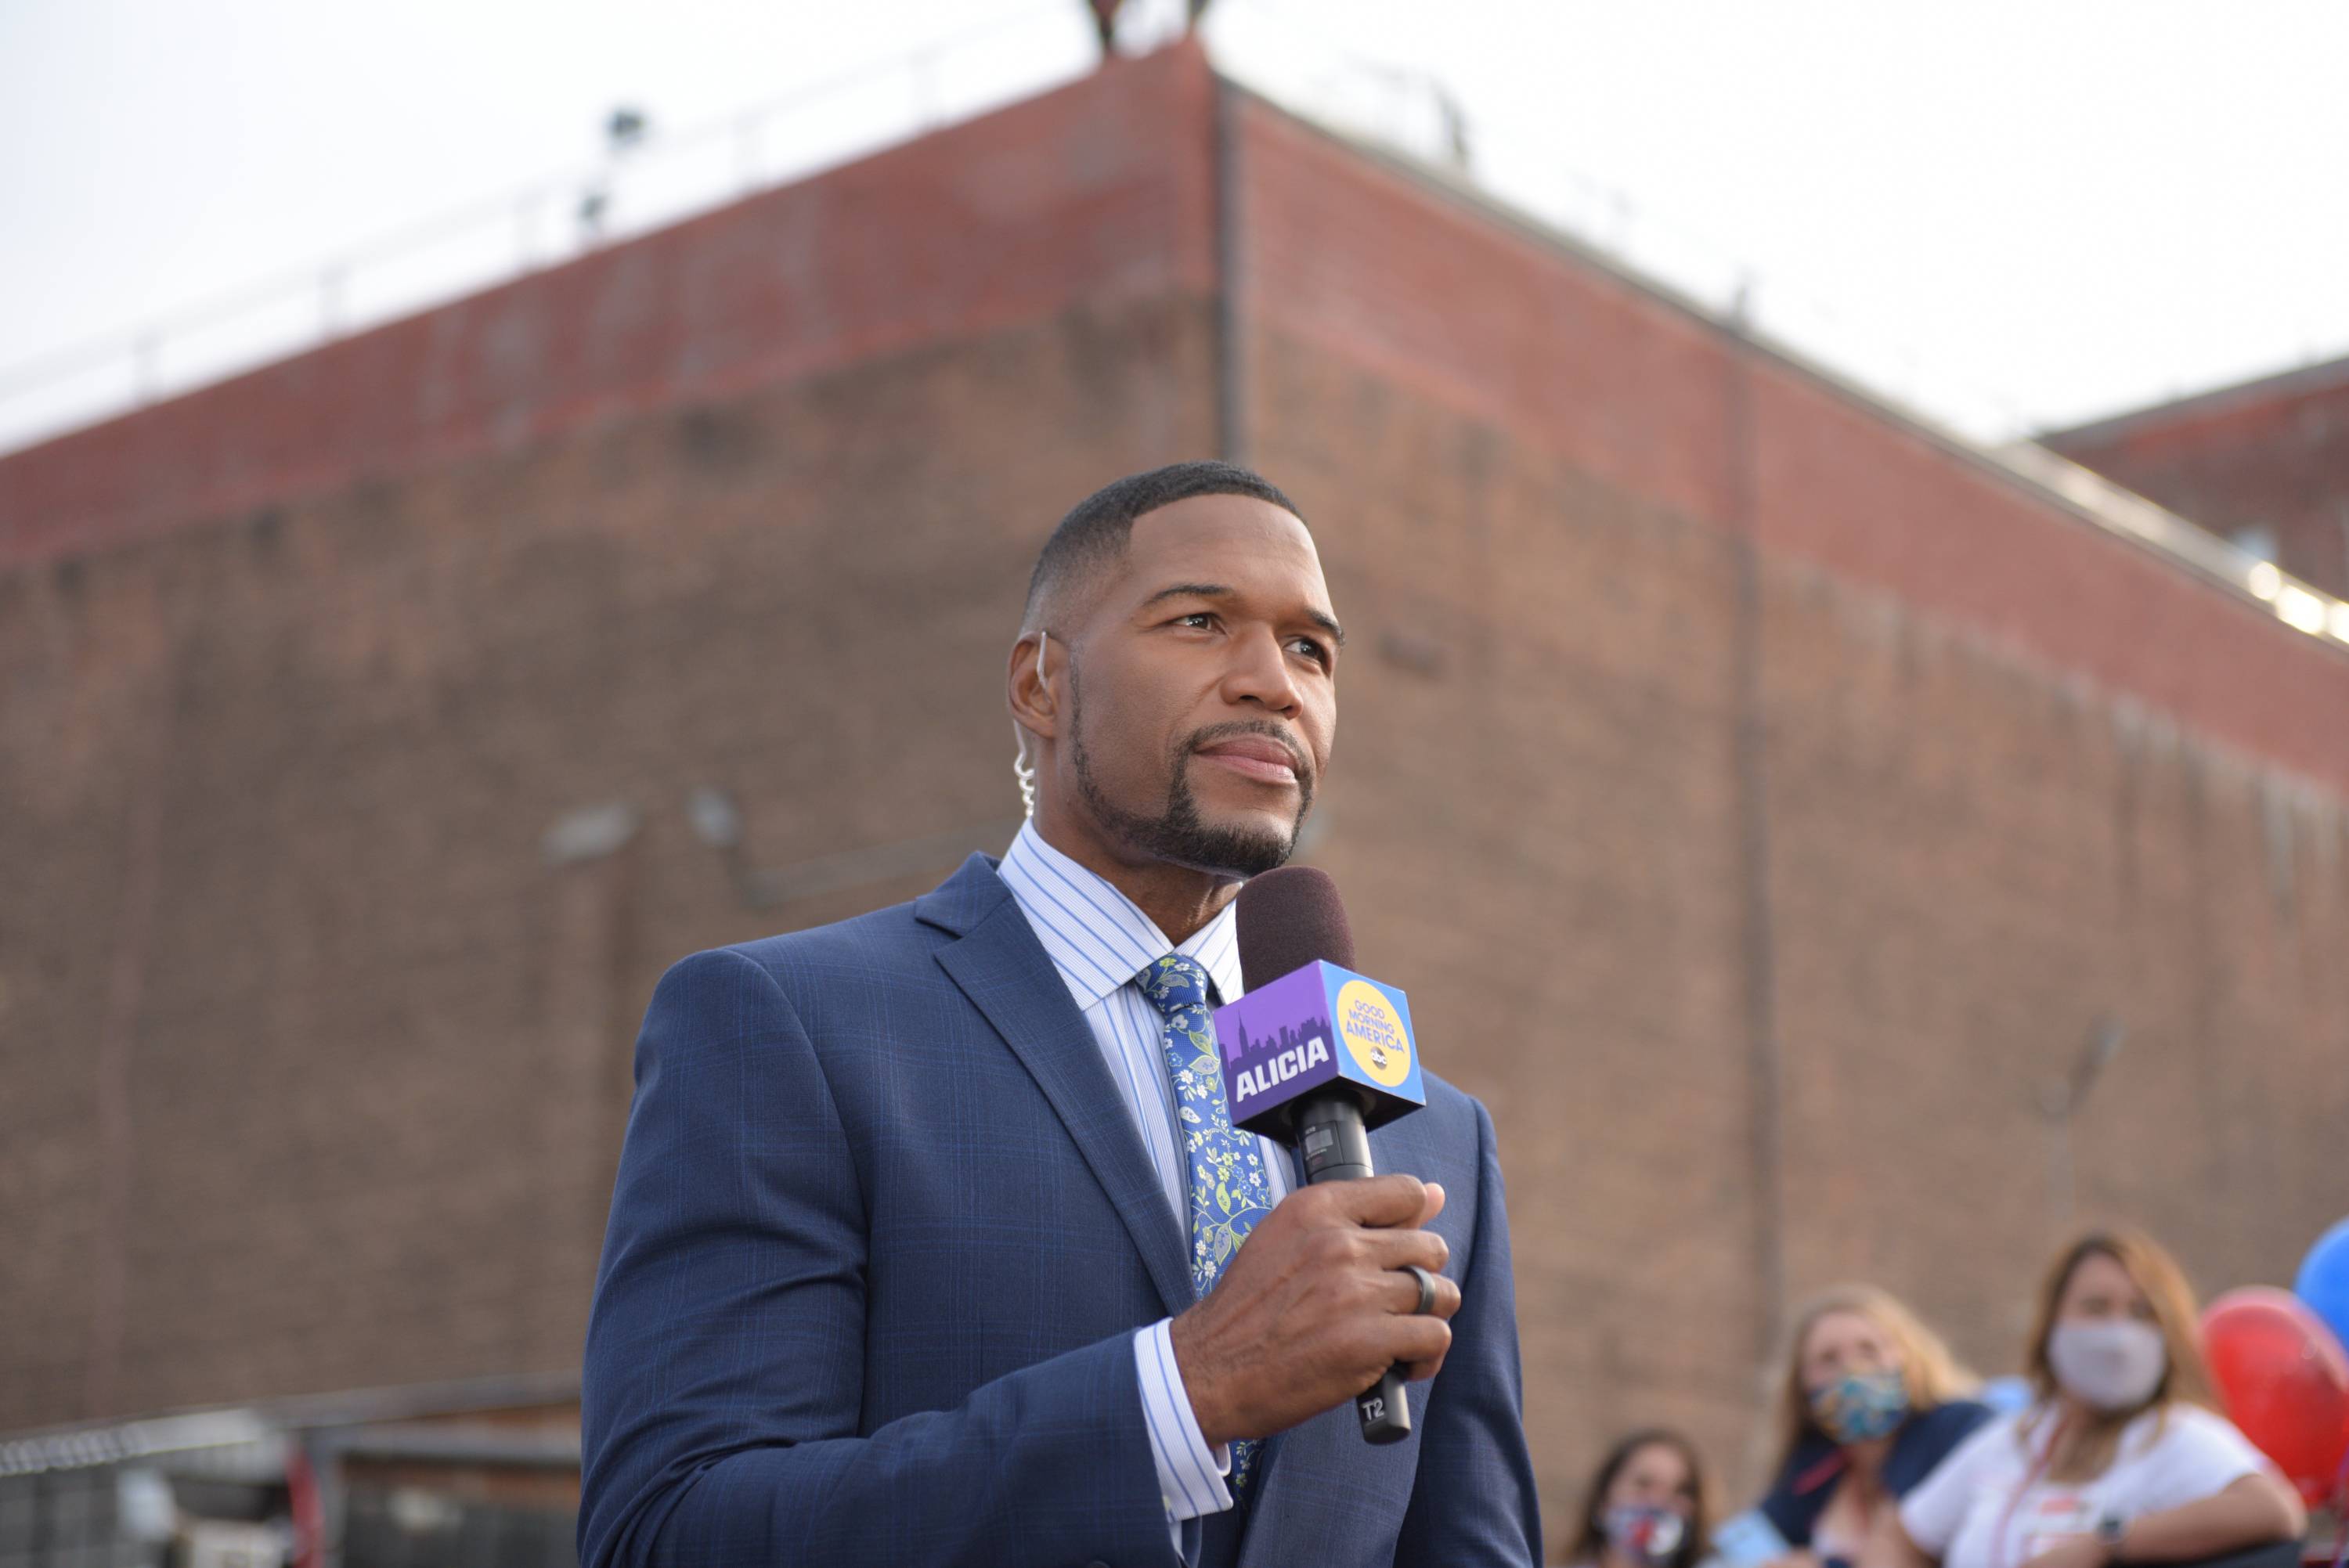 GOOD MORNING AMERICA - 9/17/20
Alicia Keys surprises a group of essential workers with a live event from Skyline Drive-in in Brooklyn, New York on "Good Morning America," Thursday, September 17, 2020, airing on ABC.   
(Photo by Paula Lobo/ABC via Getty Images) 
MICHAEL STRAHAN